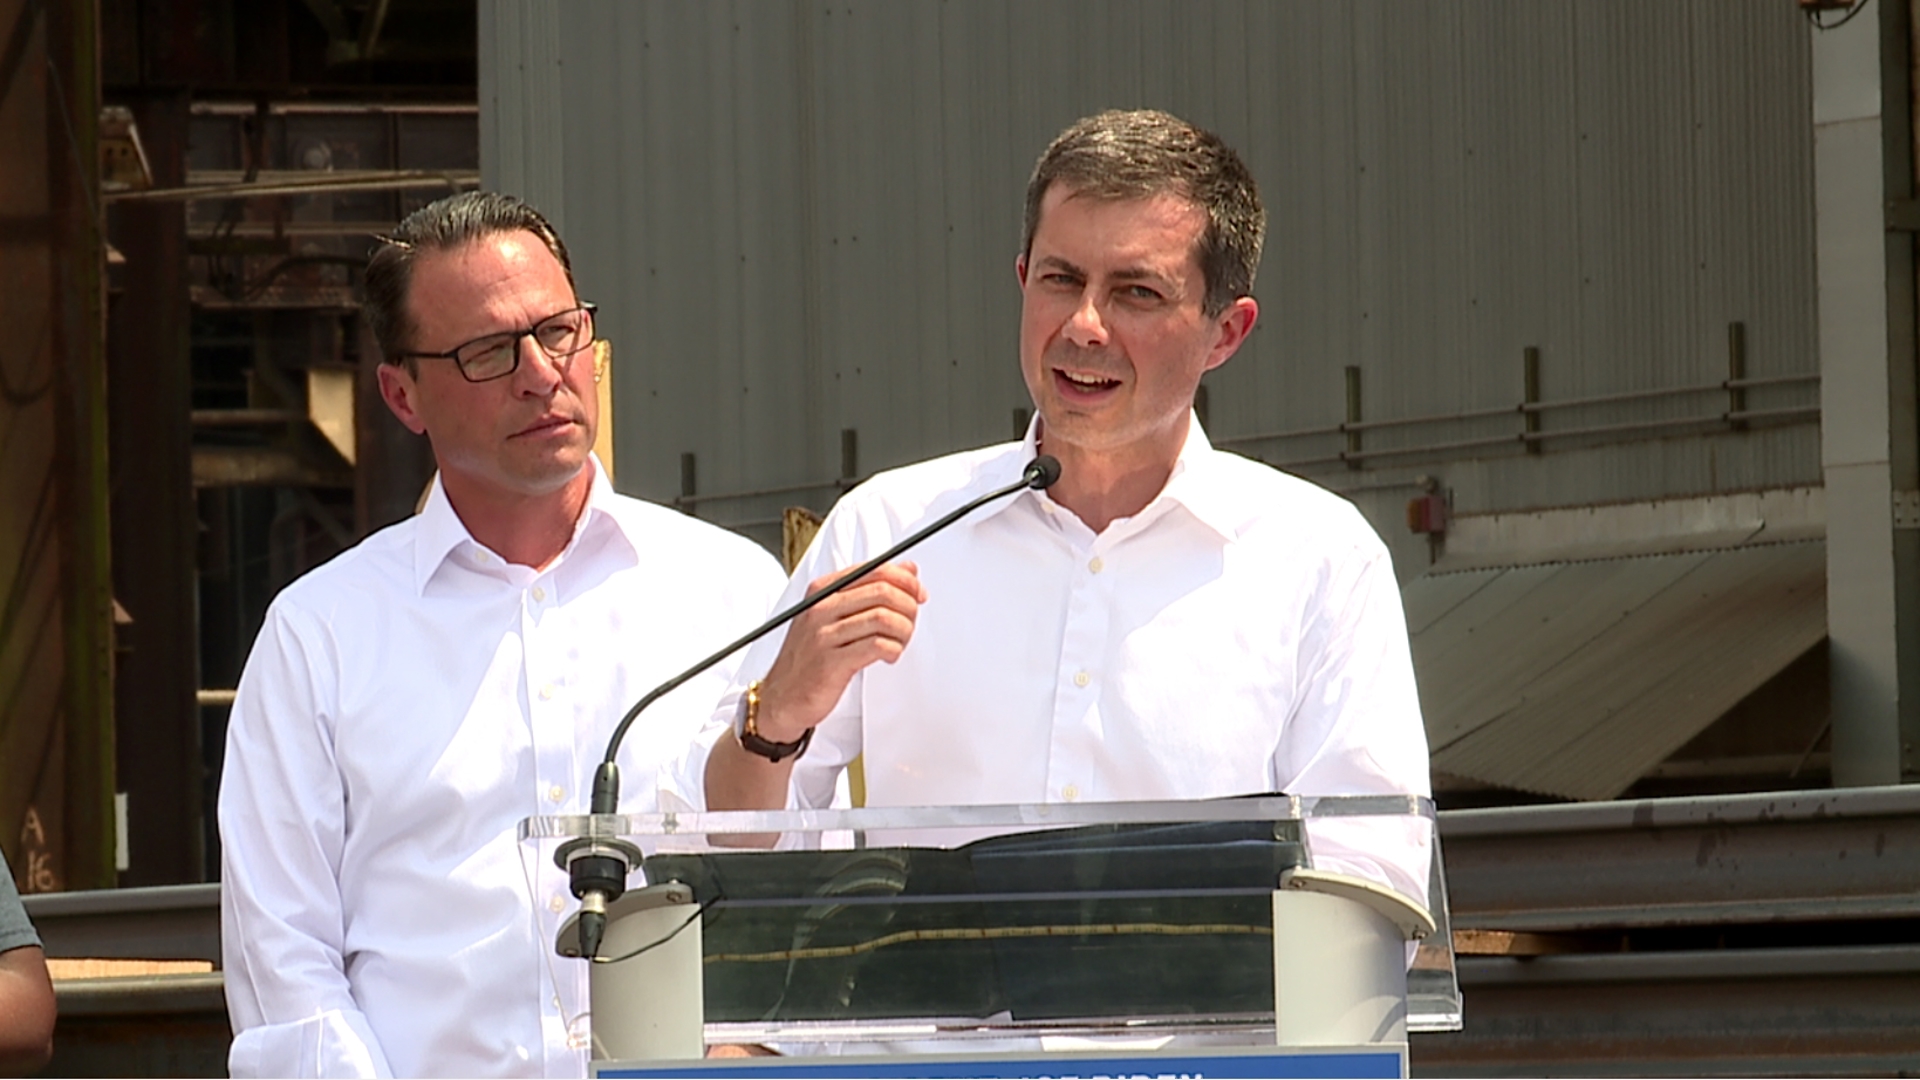 Buttigieg toured the Steelton Cleveland Cliffs steel plant along with Governor Josh Shapiro to highlight the Biden administration's investments in infrastructure.